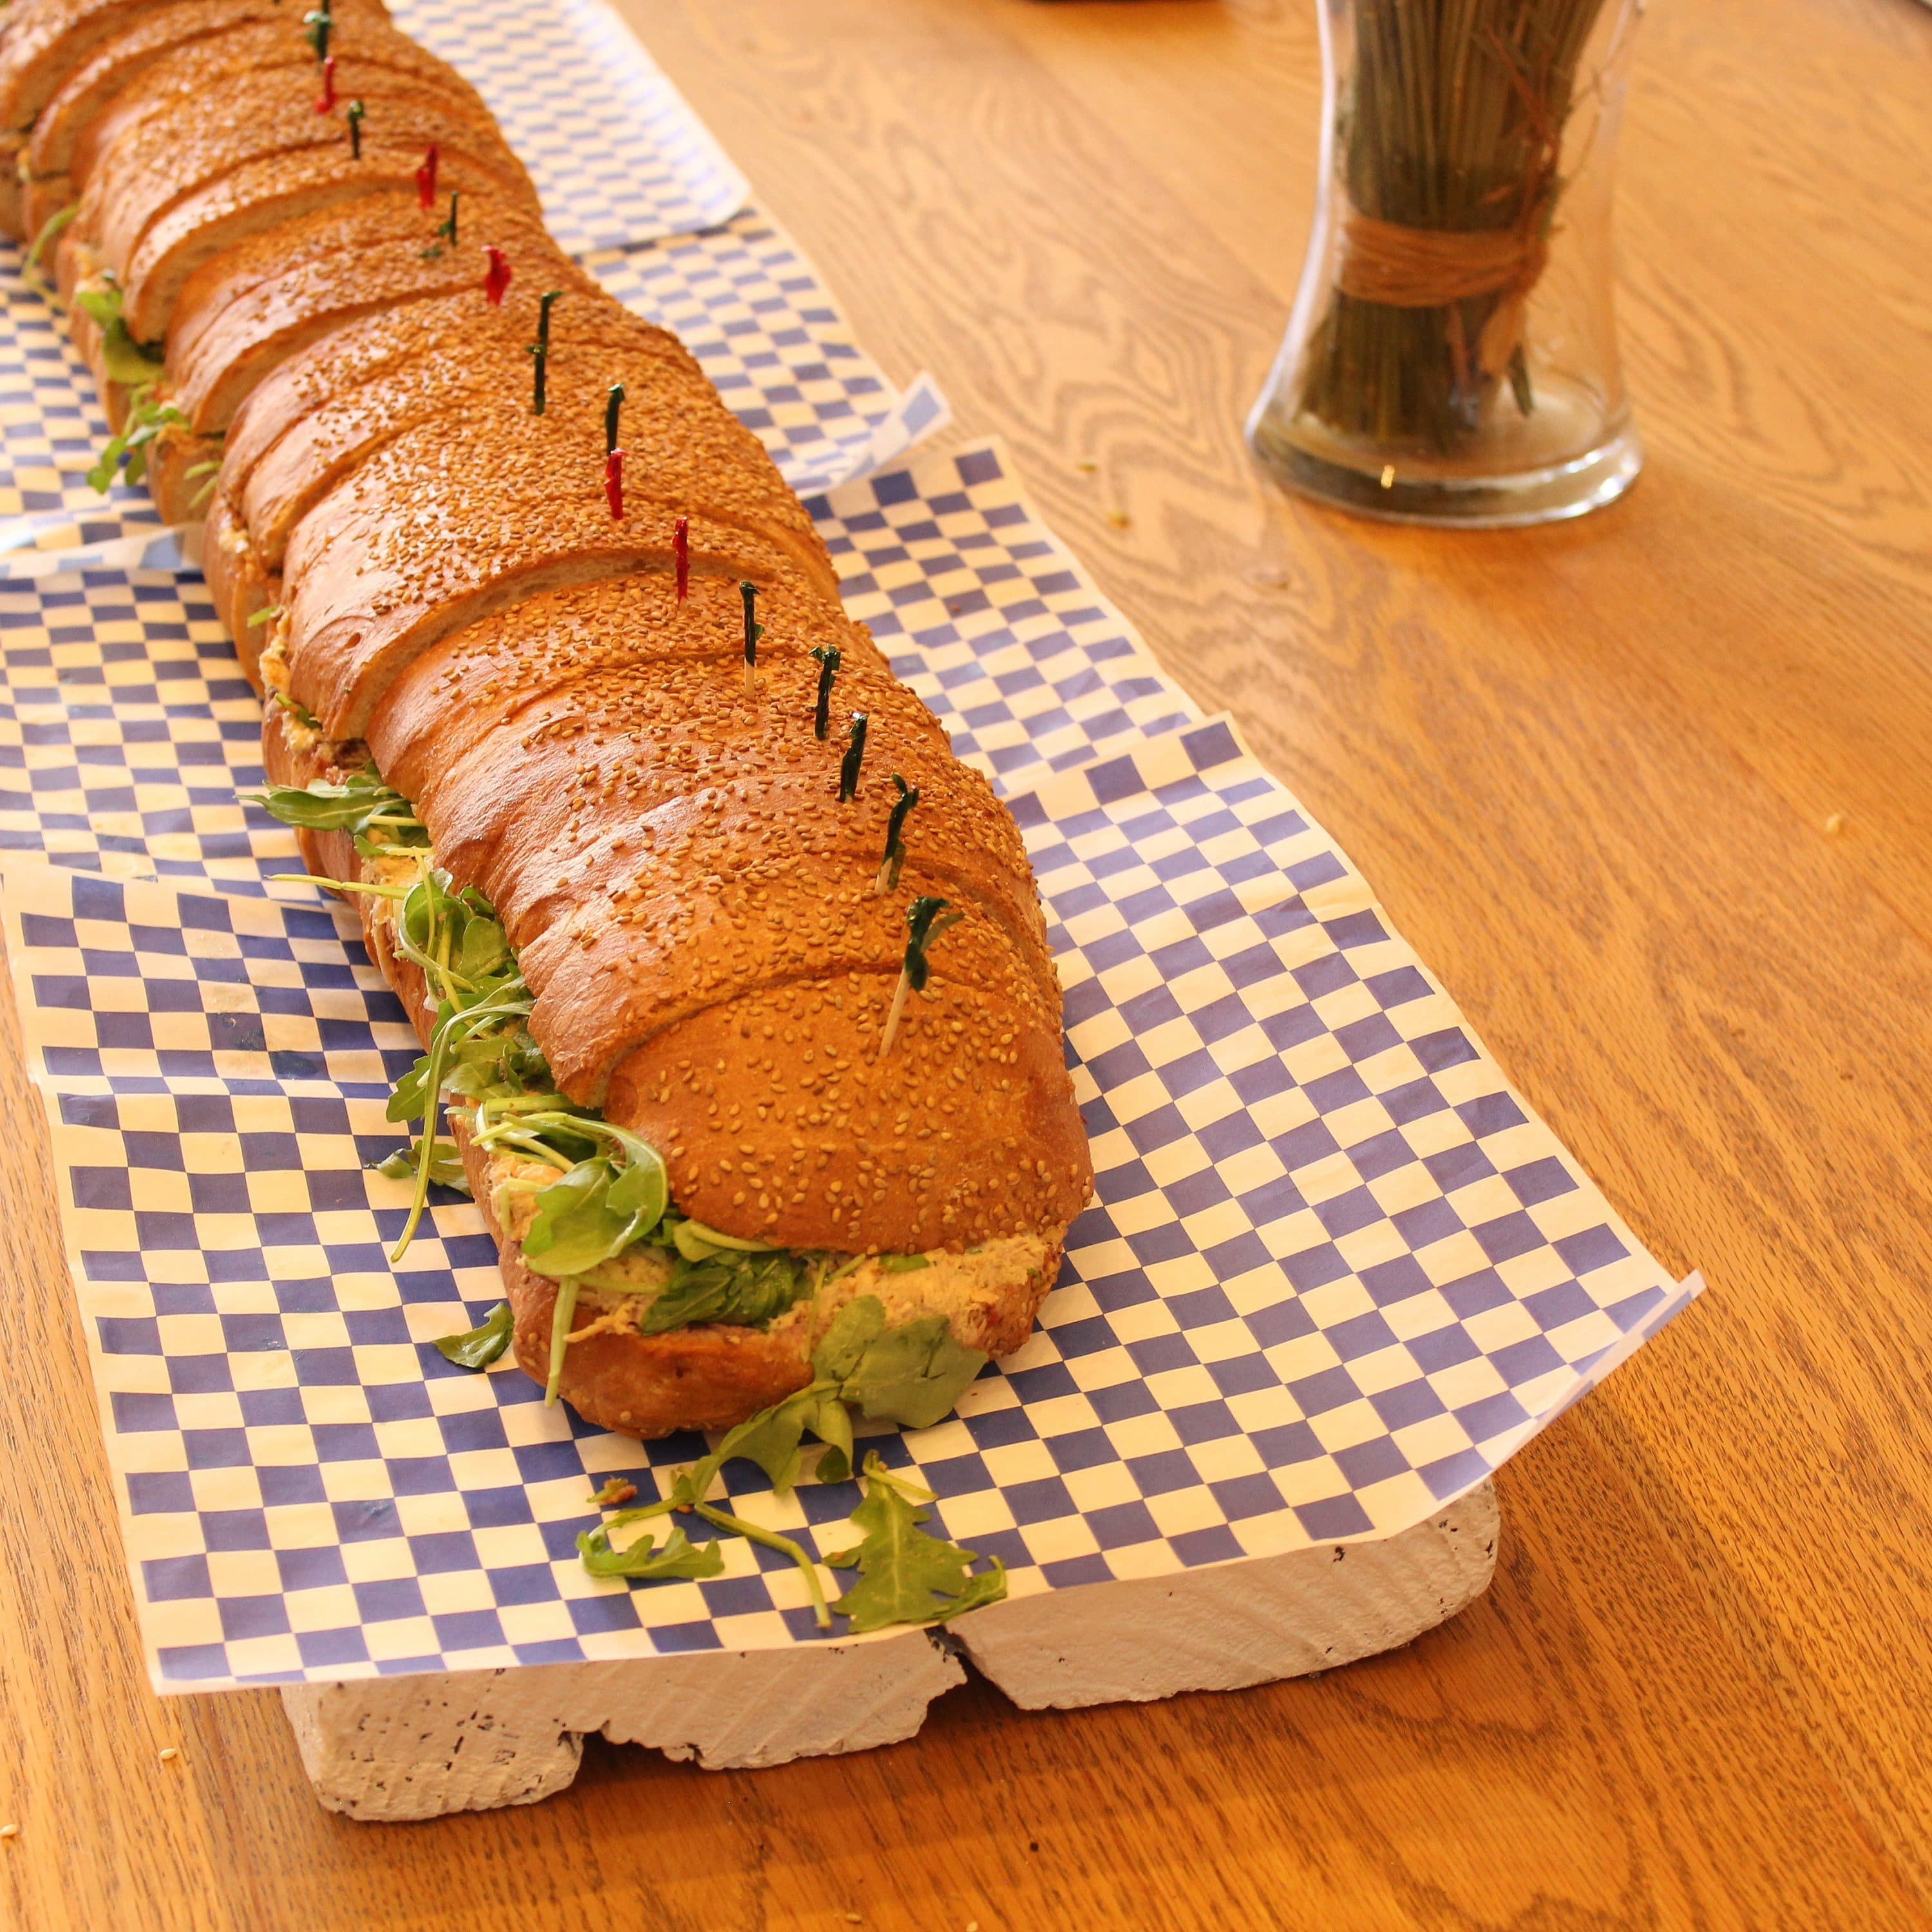 A long sub sandwich topped with sesame seeds is displayed on a wooden table. The sandwich, garnished with fresh greens, is divided into sections using colorful toothpicks. Blue and white checkered paper is placed underneath for decoration.